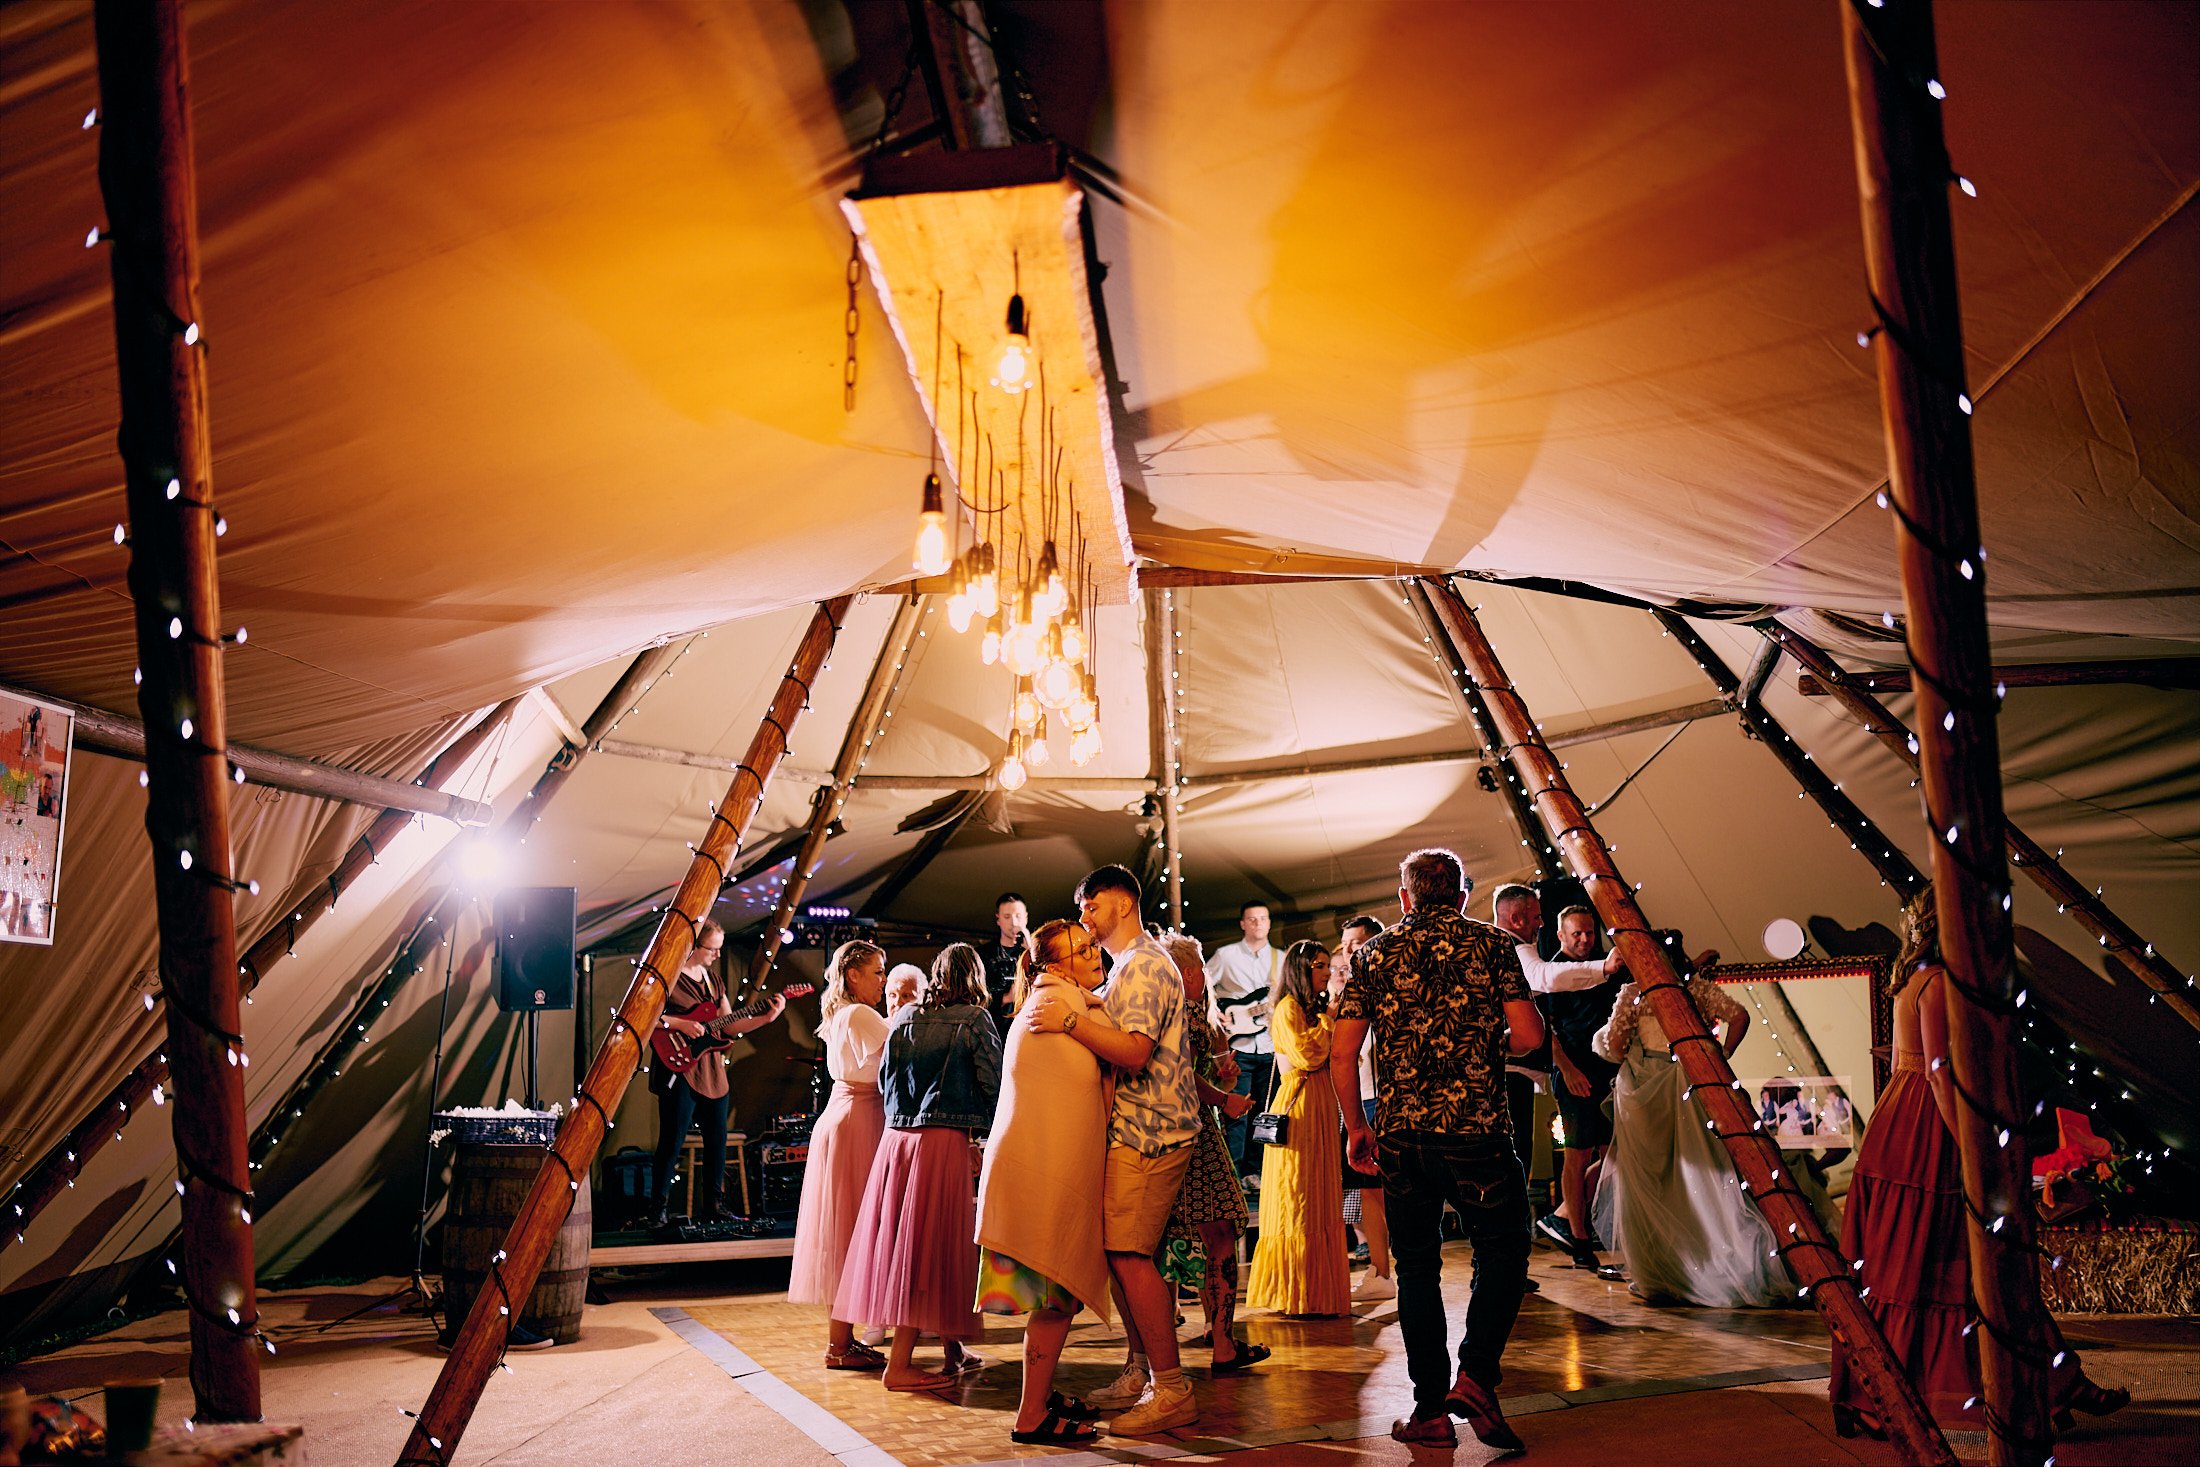 party in teepee tent at festival theme wedding